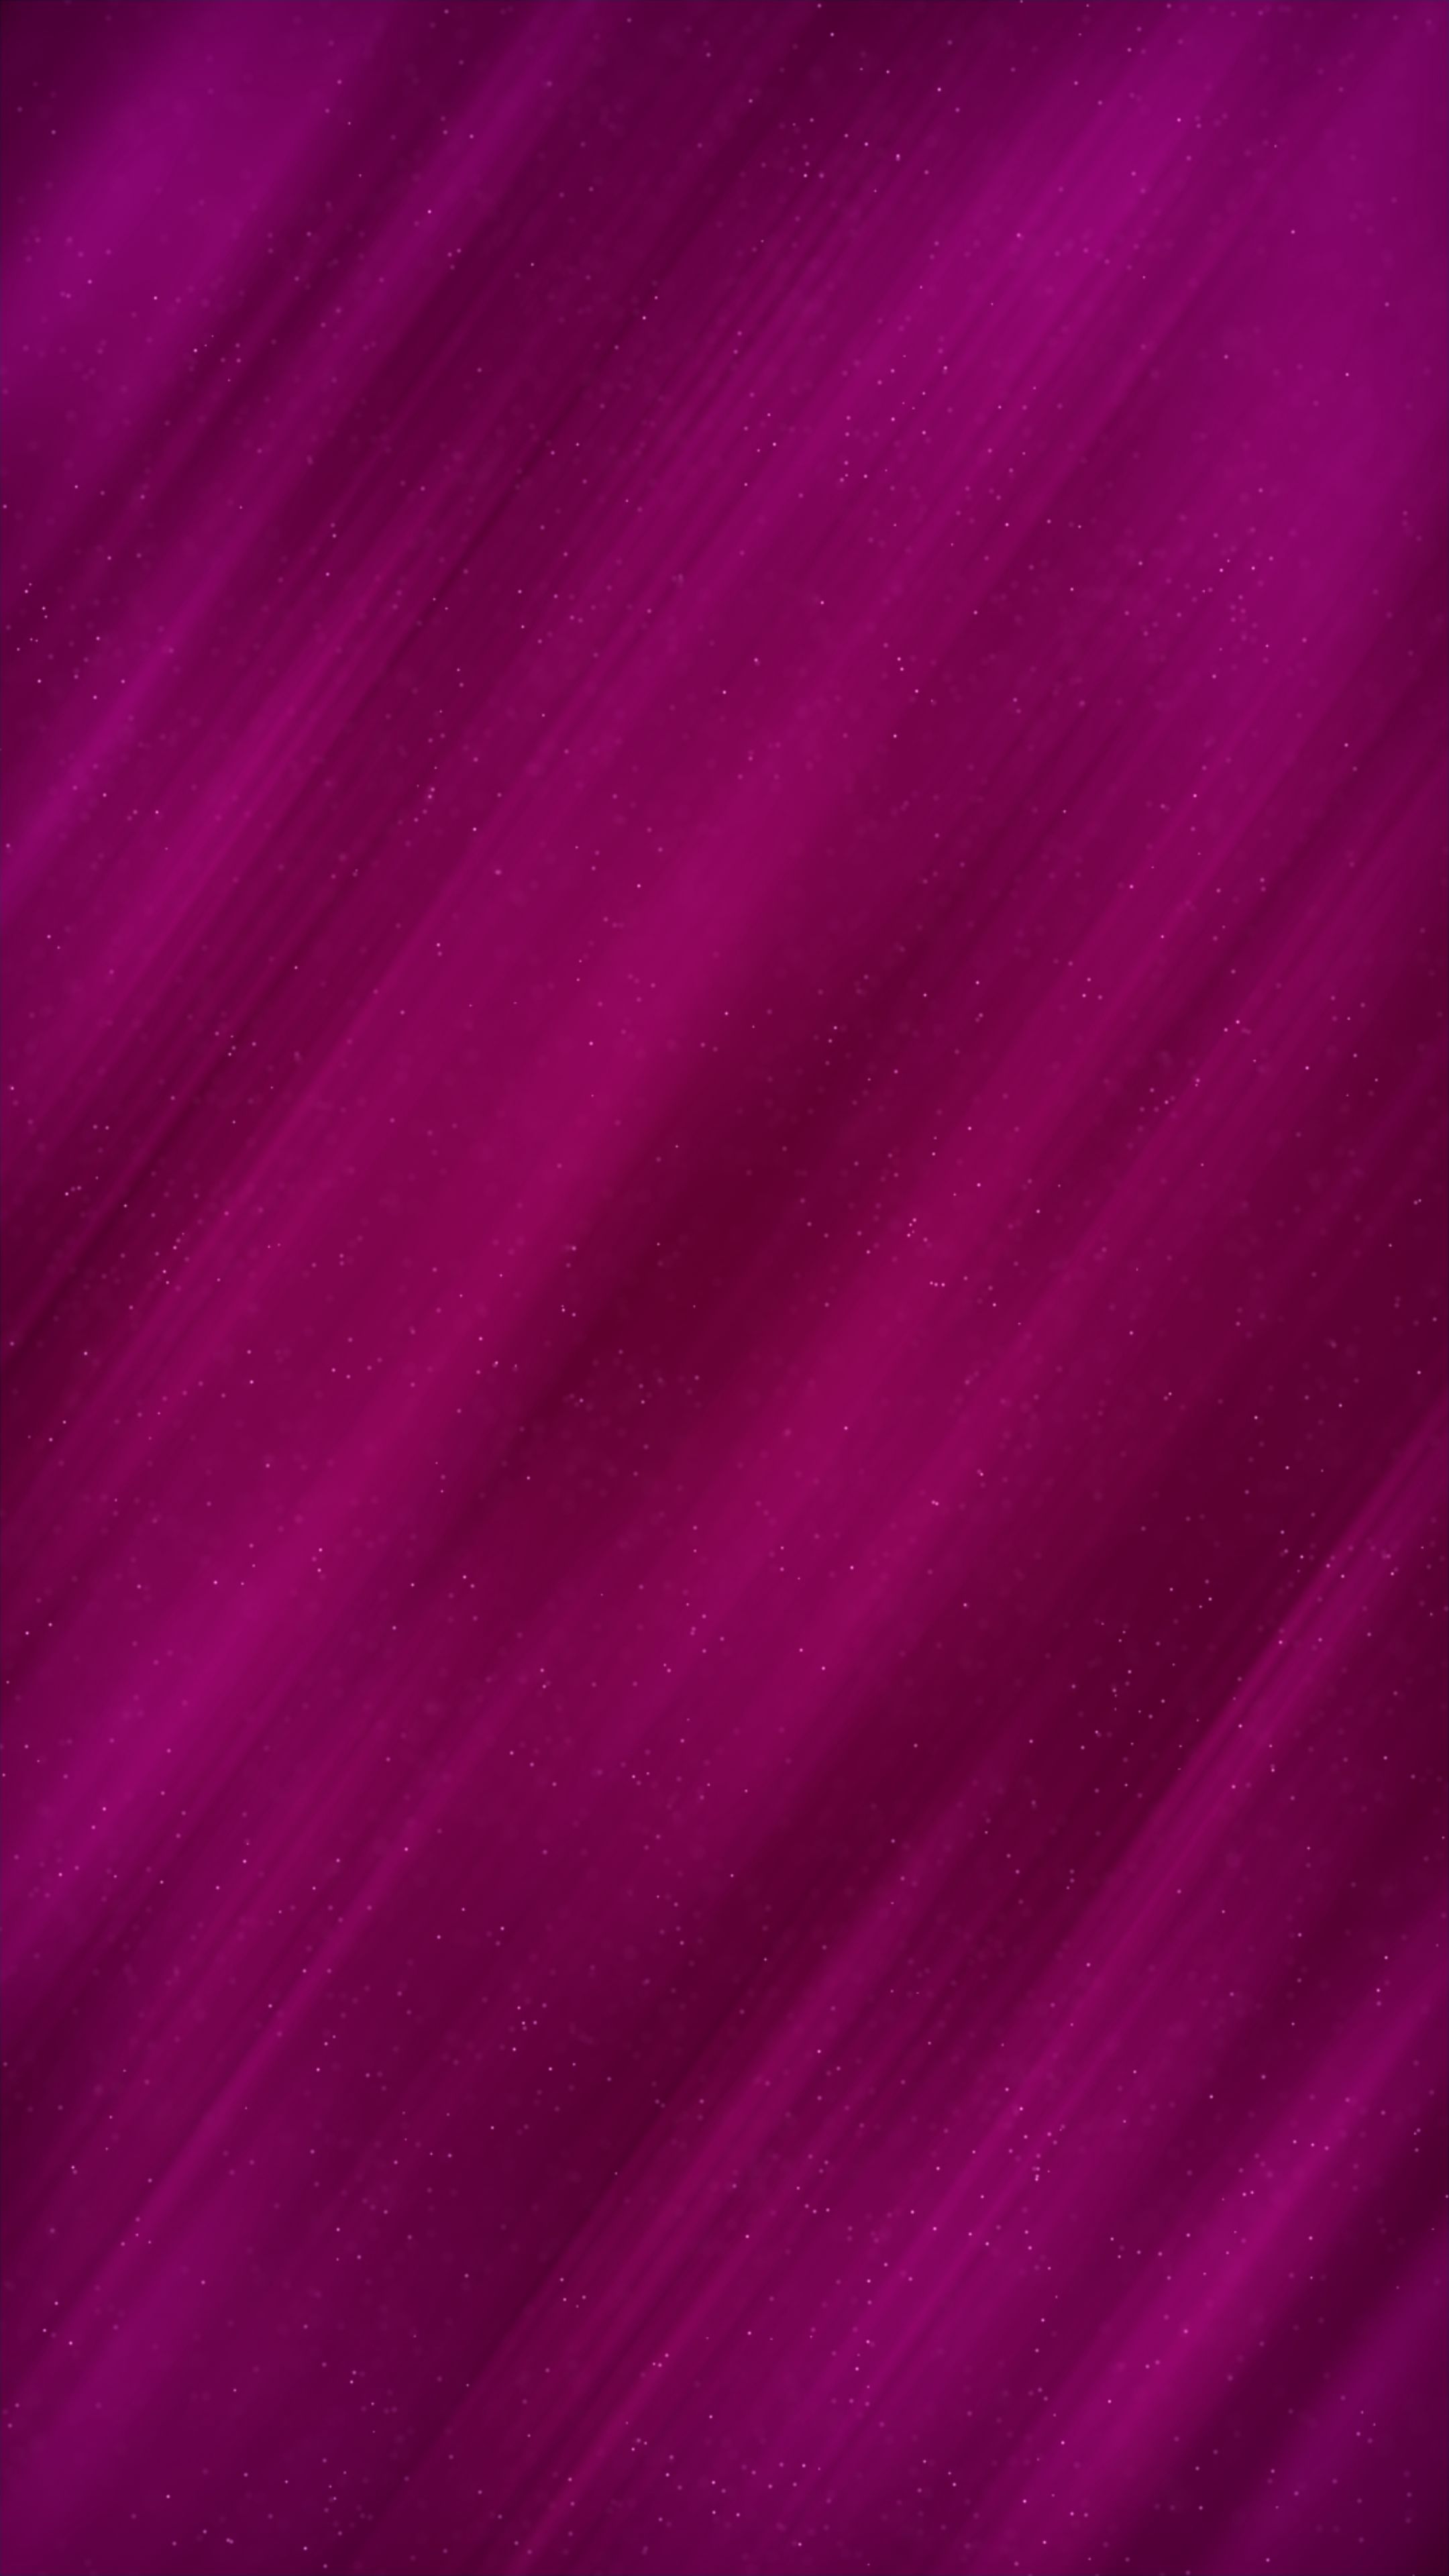 66704 Screensavers and Wallpapers Obliquely for phone. Download obliquely, background, abstract, violet, texture, textures, purple, shades pictures for free